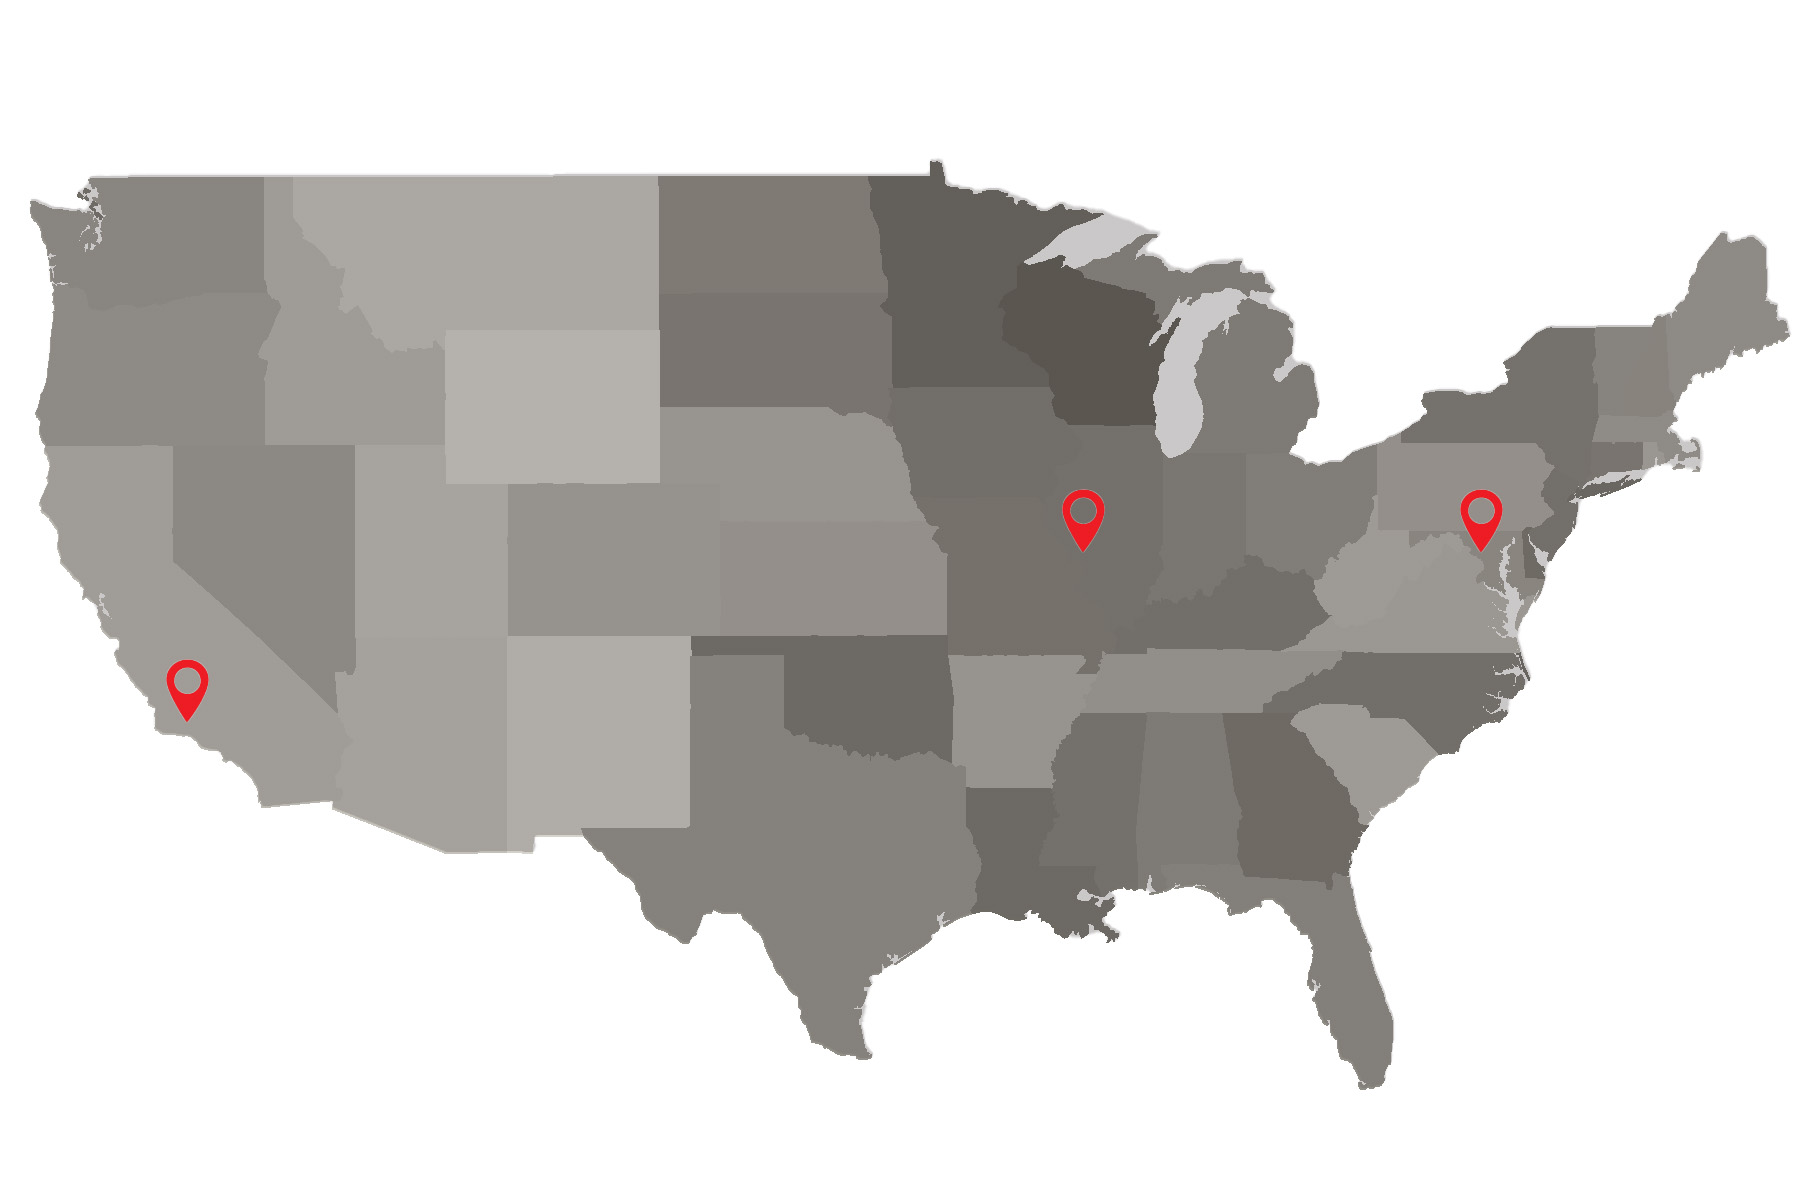 USA Gray with red markers for  locations of offices